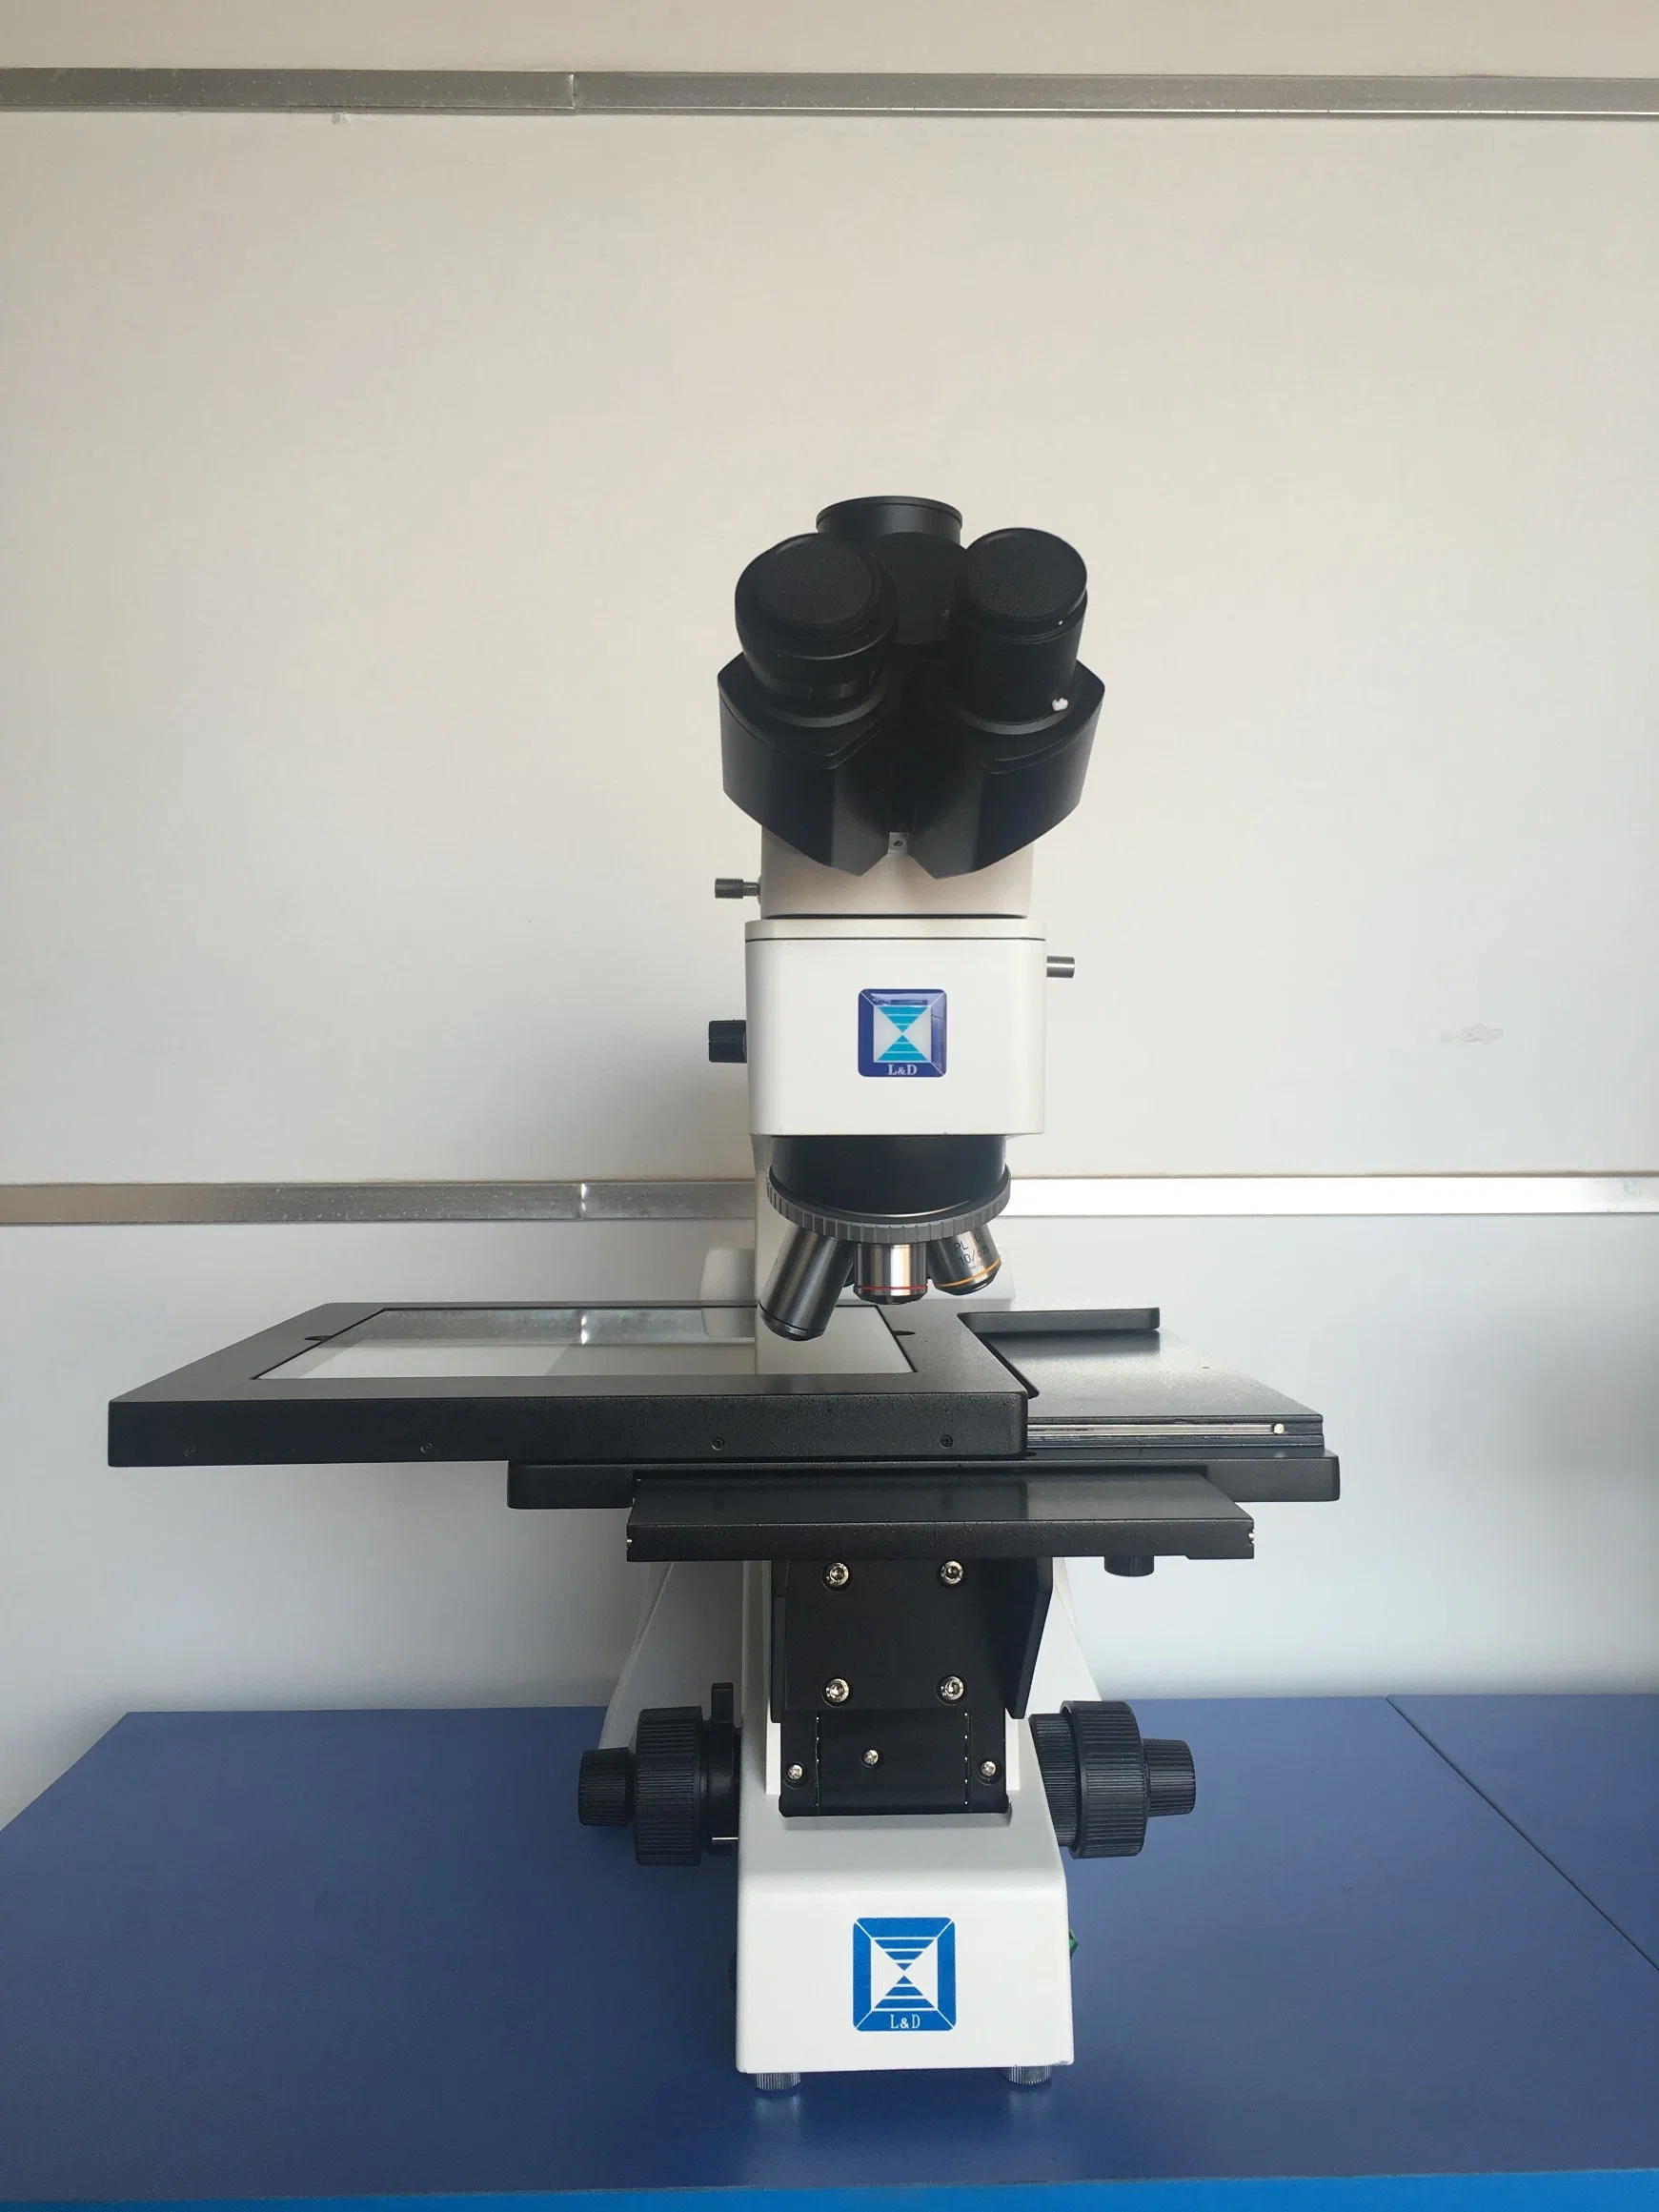 Reflected and Transmitted Illumination Upright Metallurgical Microscope (LM-308)